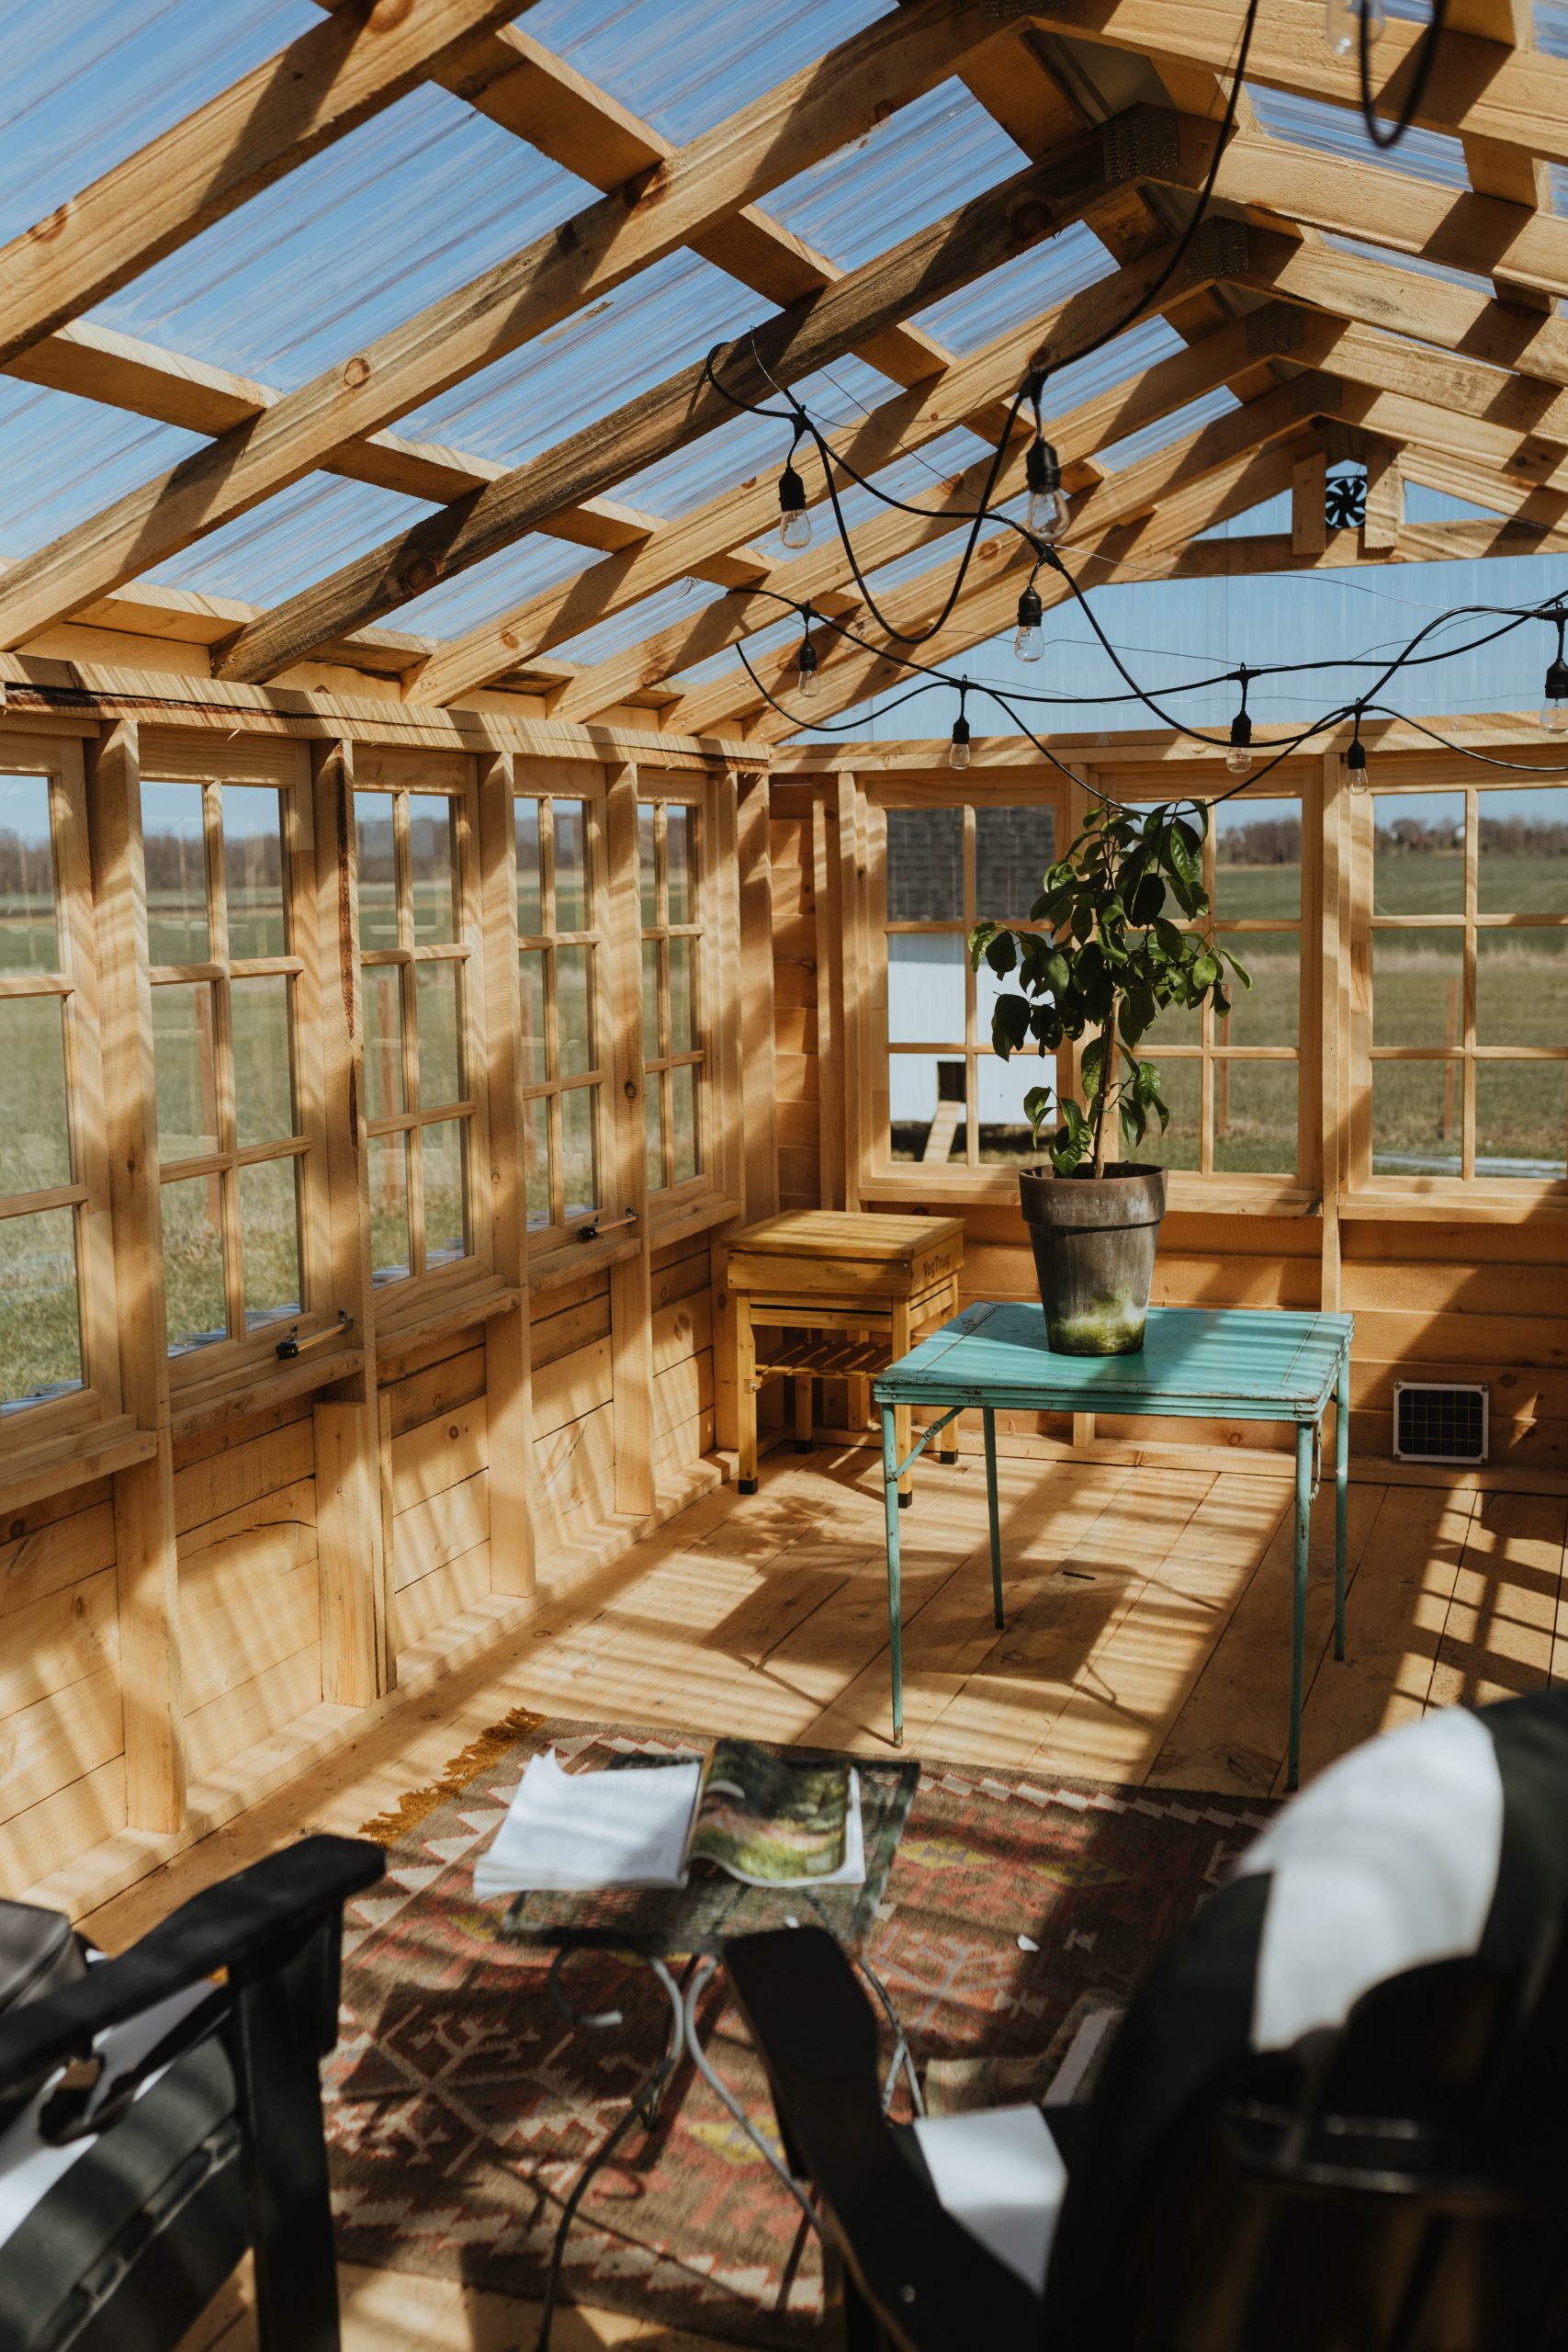 All natural wood built greenhouse